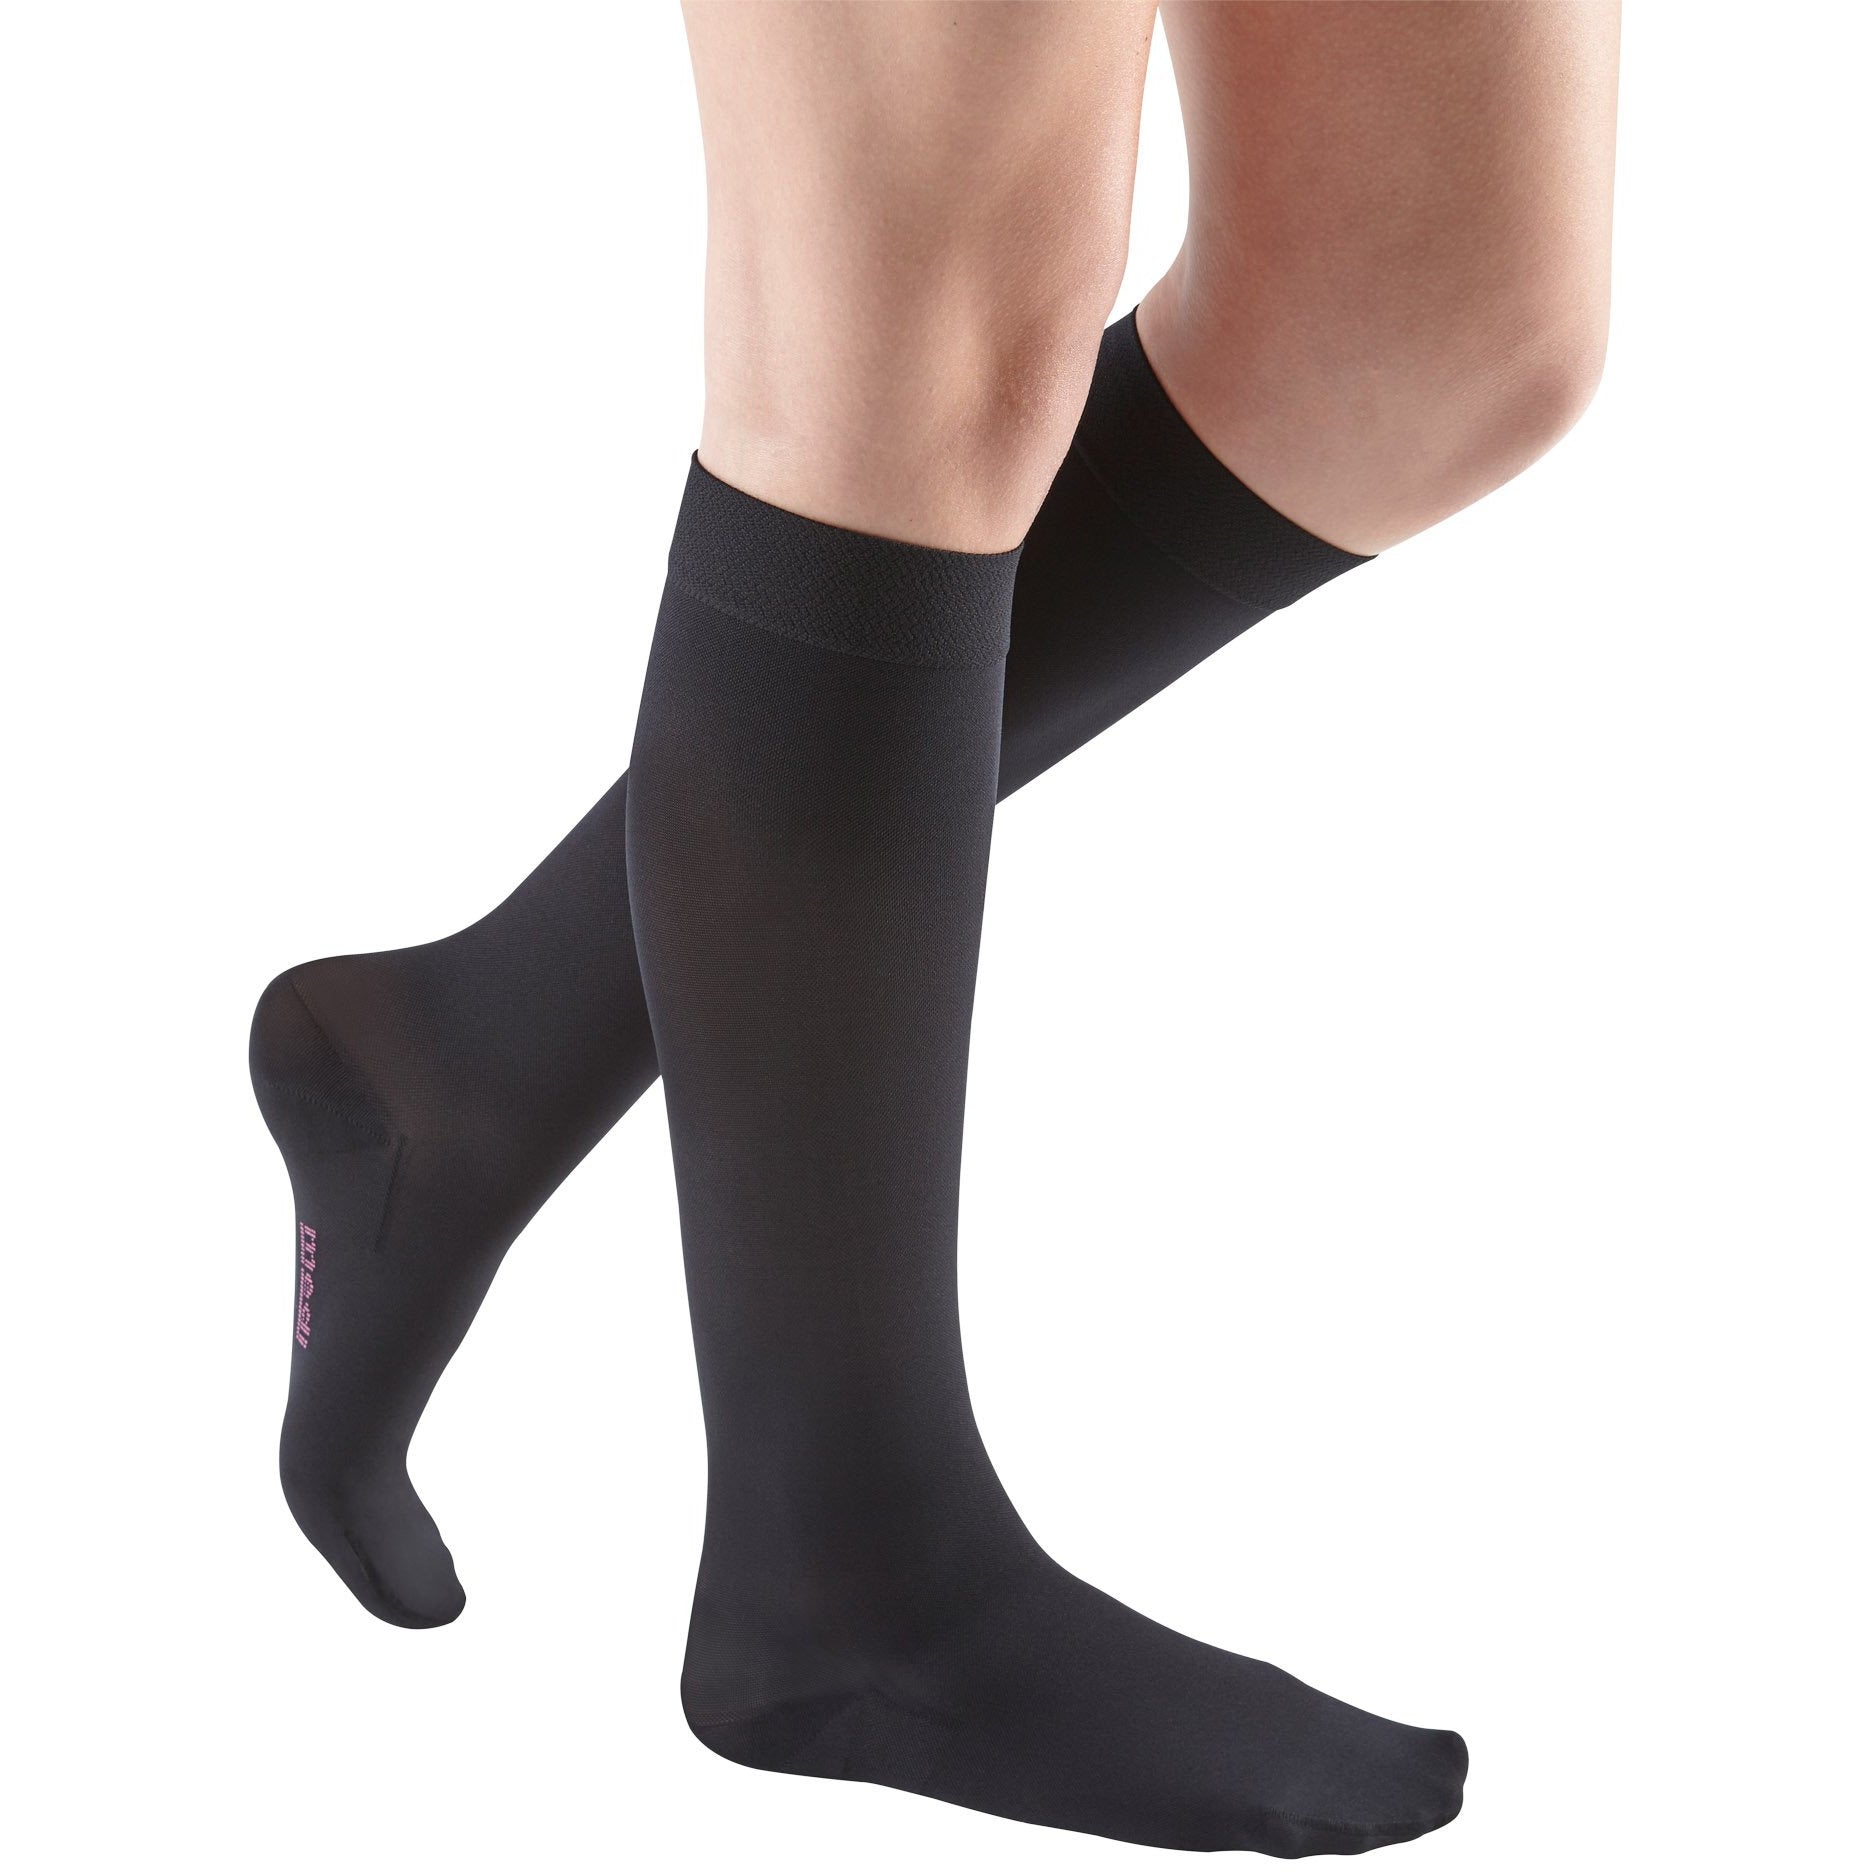  2 Pairs Thigh High Compression Socks for Men & Women 30-40 mmHg  Extra Firm Compression Stockings Closed Toe 30-40 mmHg Thigh High  Compression Socks for Swelling Edema Men and Women 